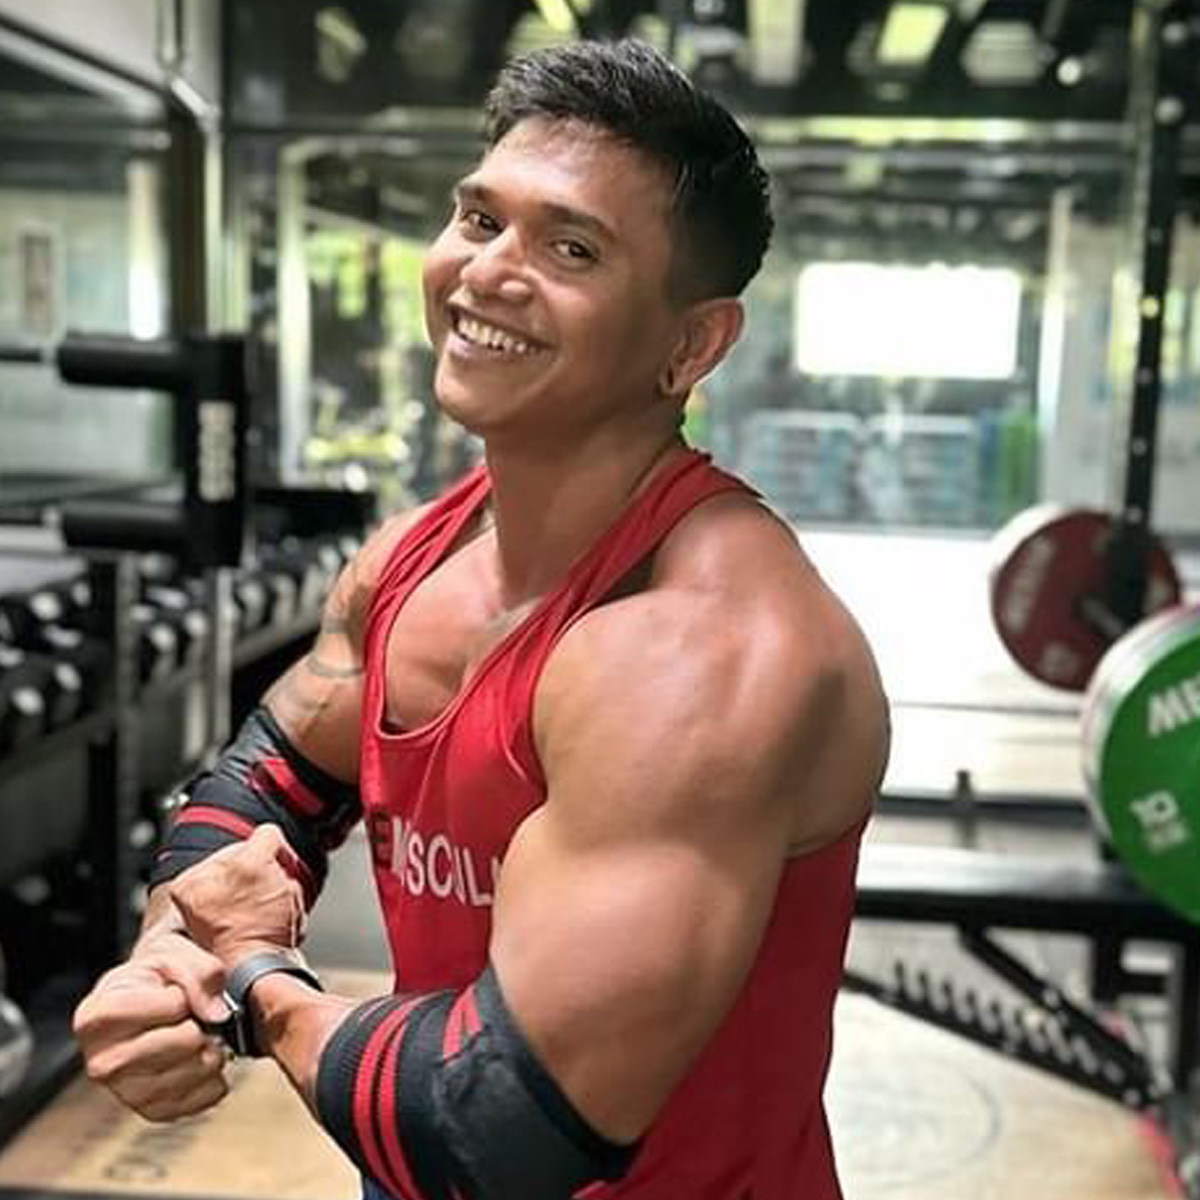 Bodybuilder Justyn Vicky Dead at 33 After Barbell Falls on His Neck